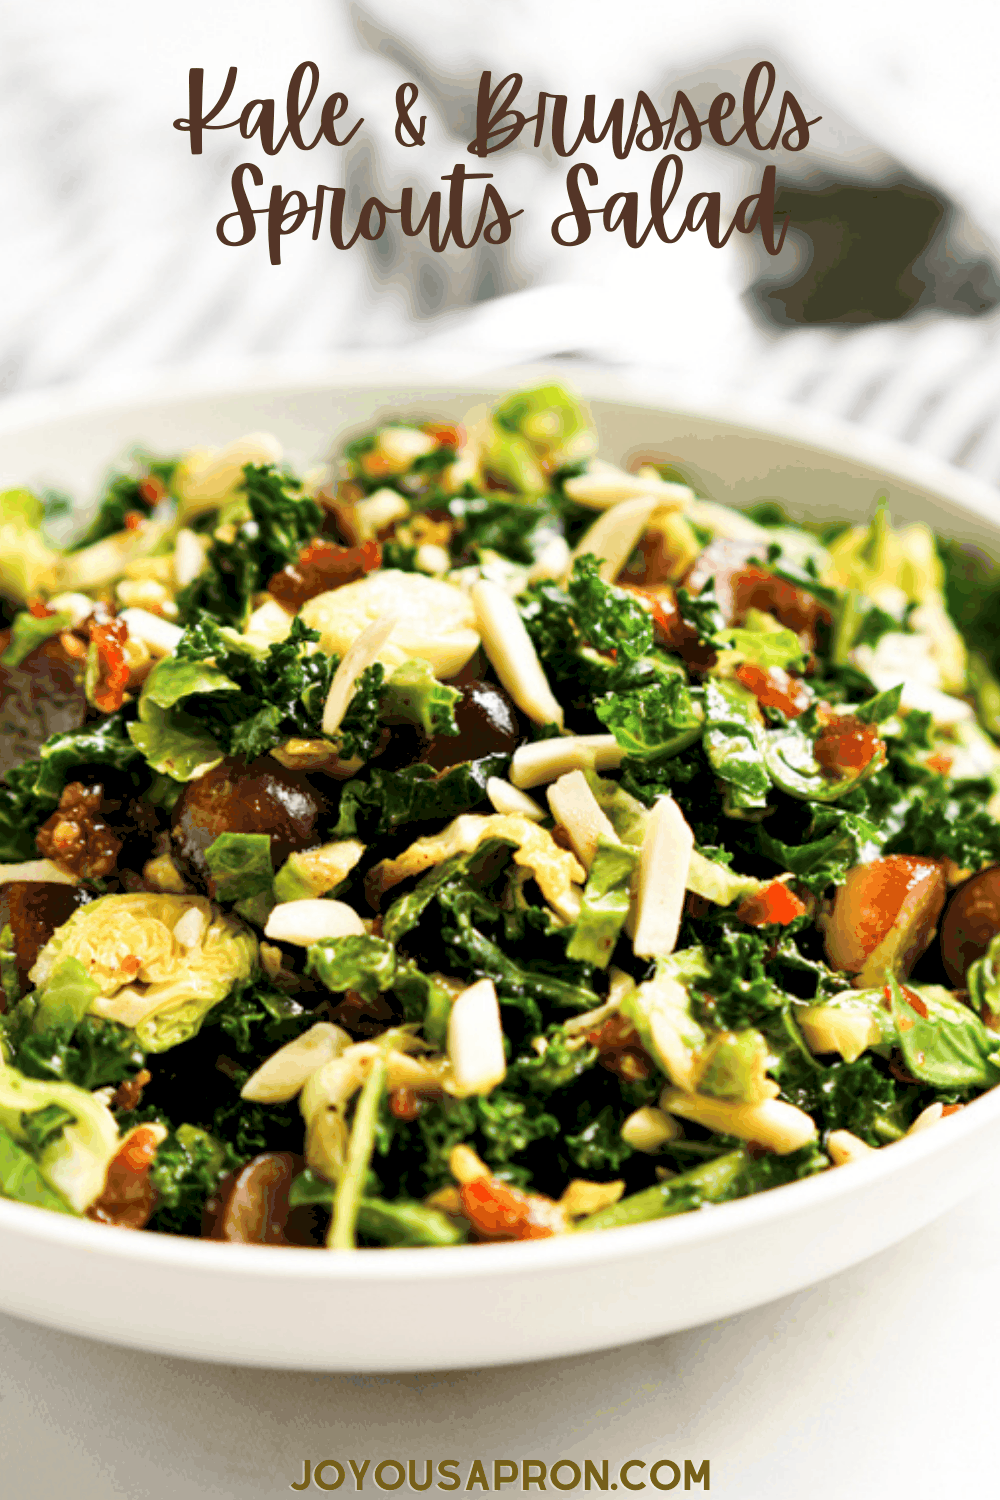 Kale and Brussels Sprouts Salad - healthy and delicious vegetable side dish! Crunchy Brussels sprouts and kale combined with grapes and slivered almonds tossed in a savory, sweet and tangy homemade Bacon Vinaigrette. via @joyousapron